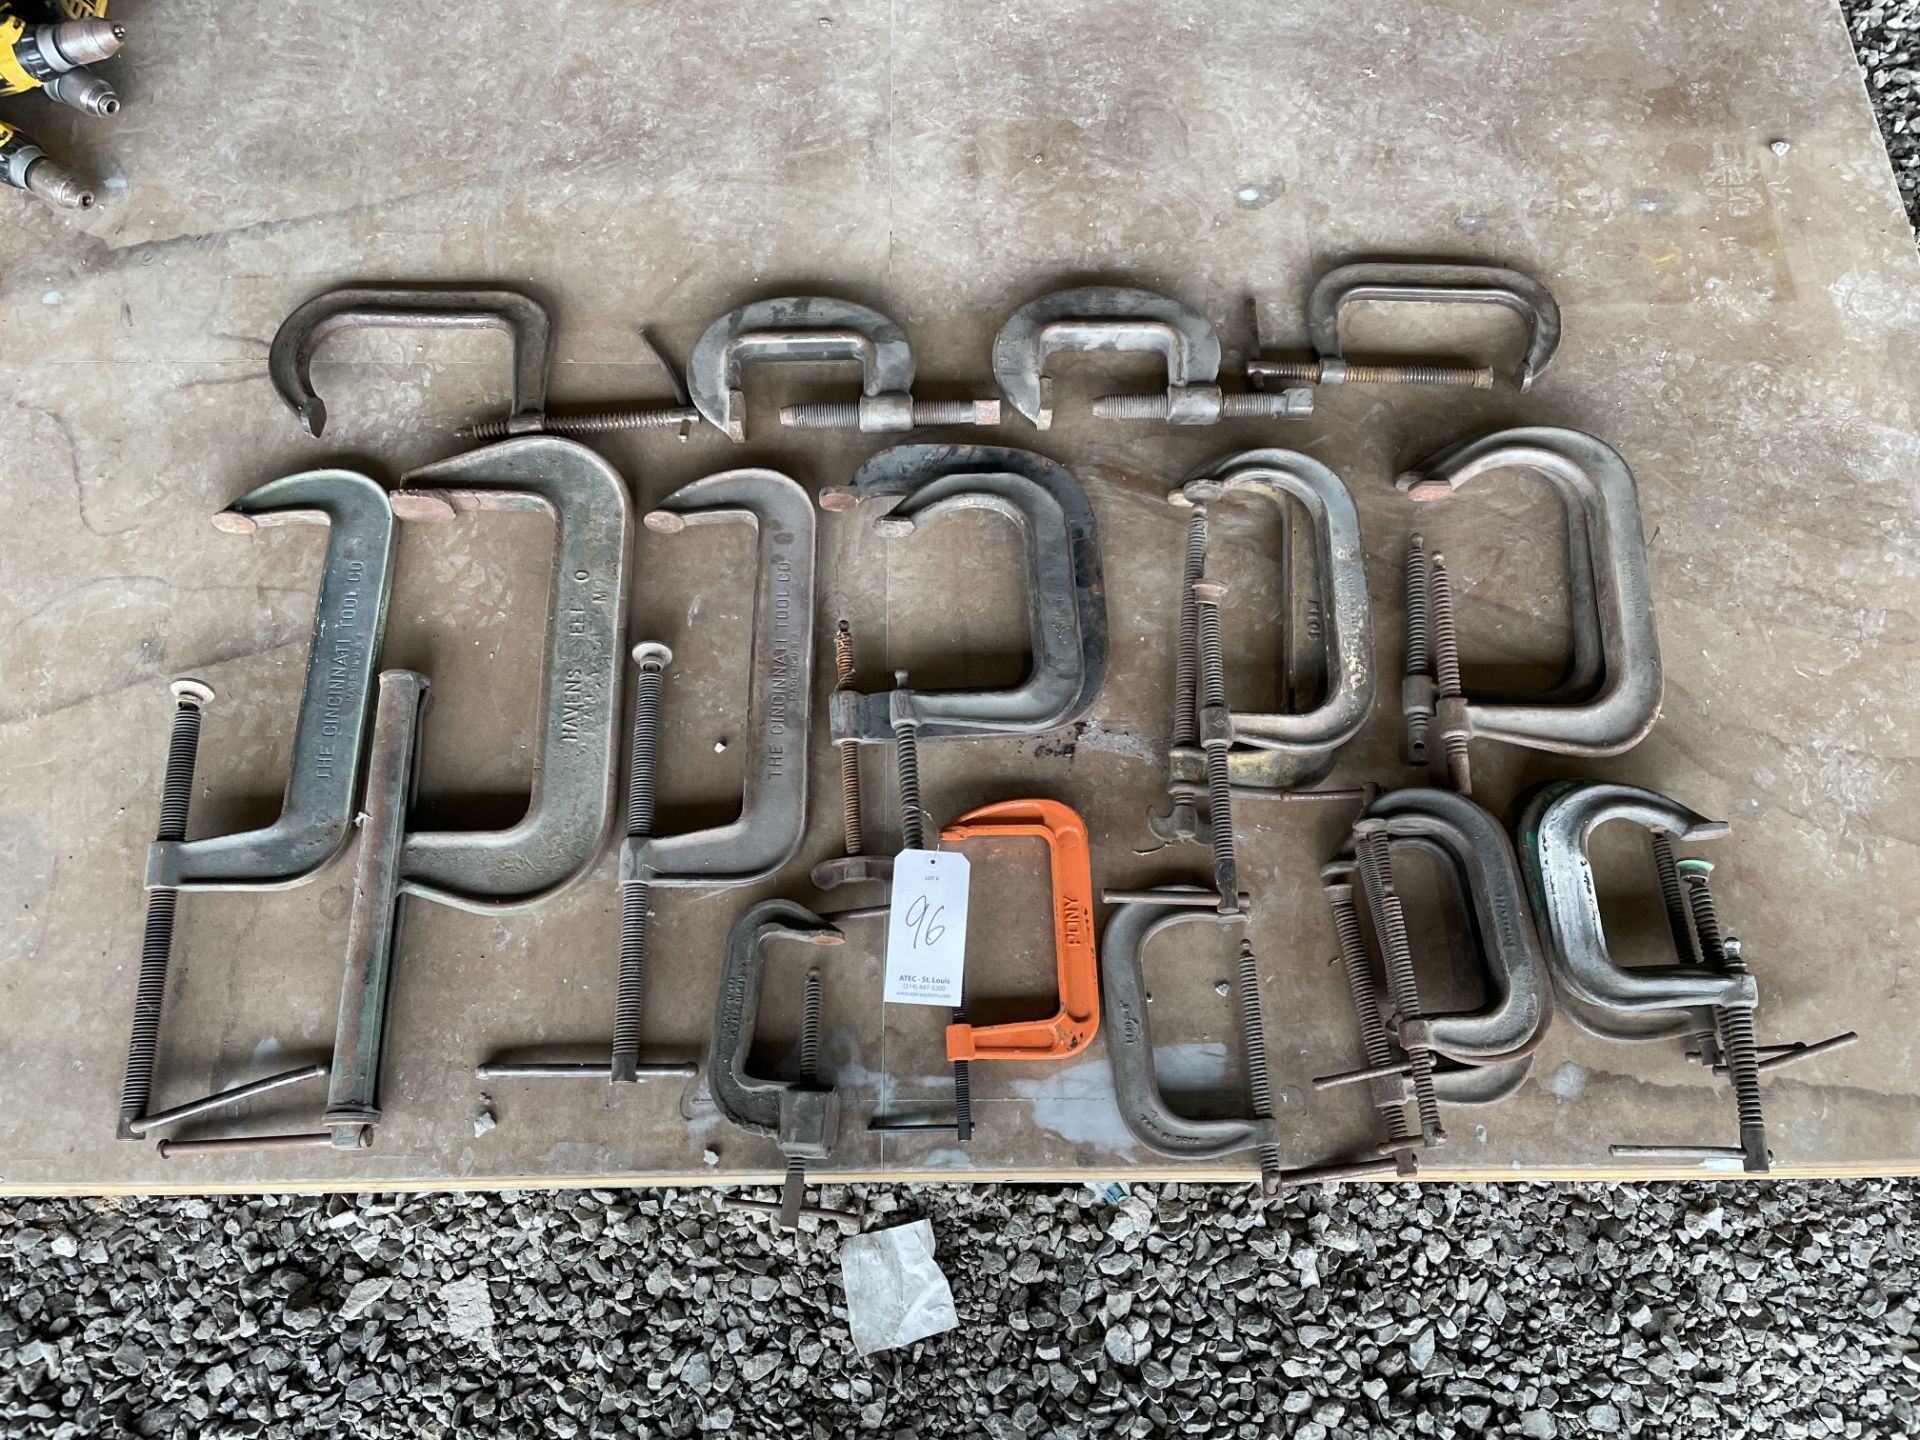 Lot Consisting of Assorted C-Clamps